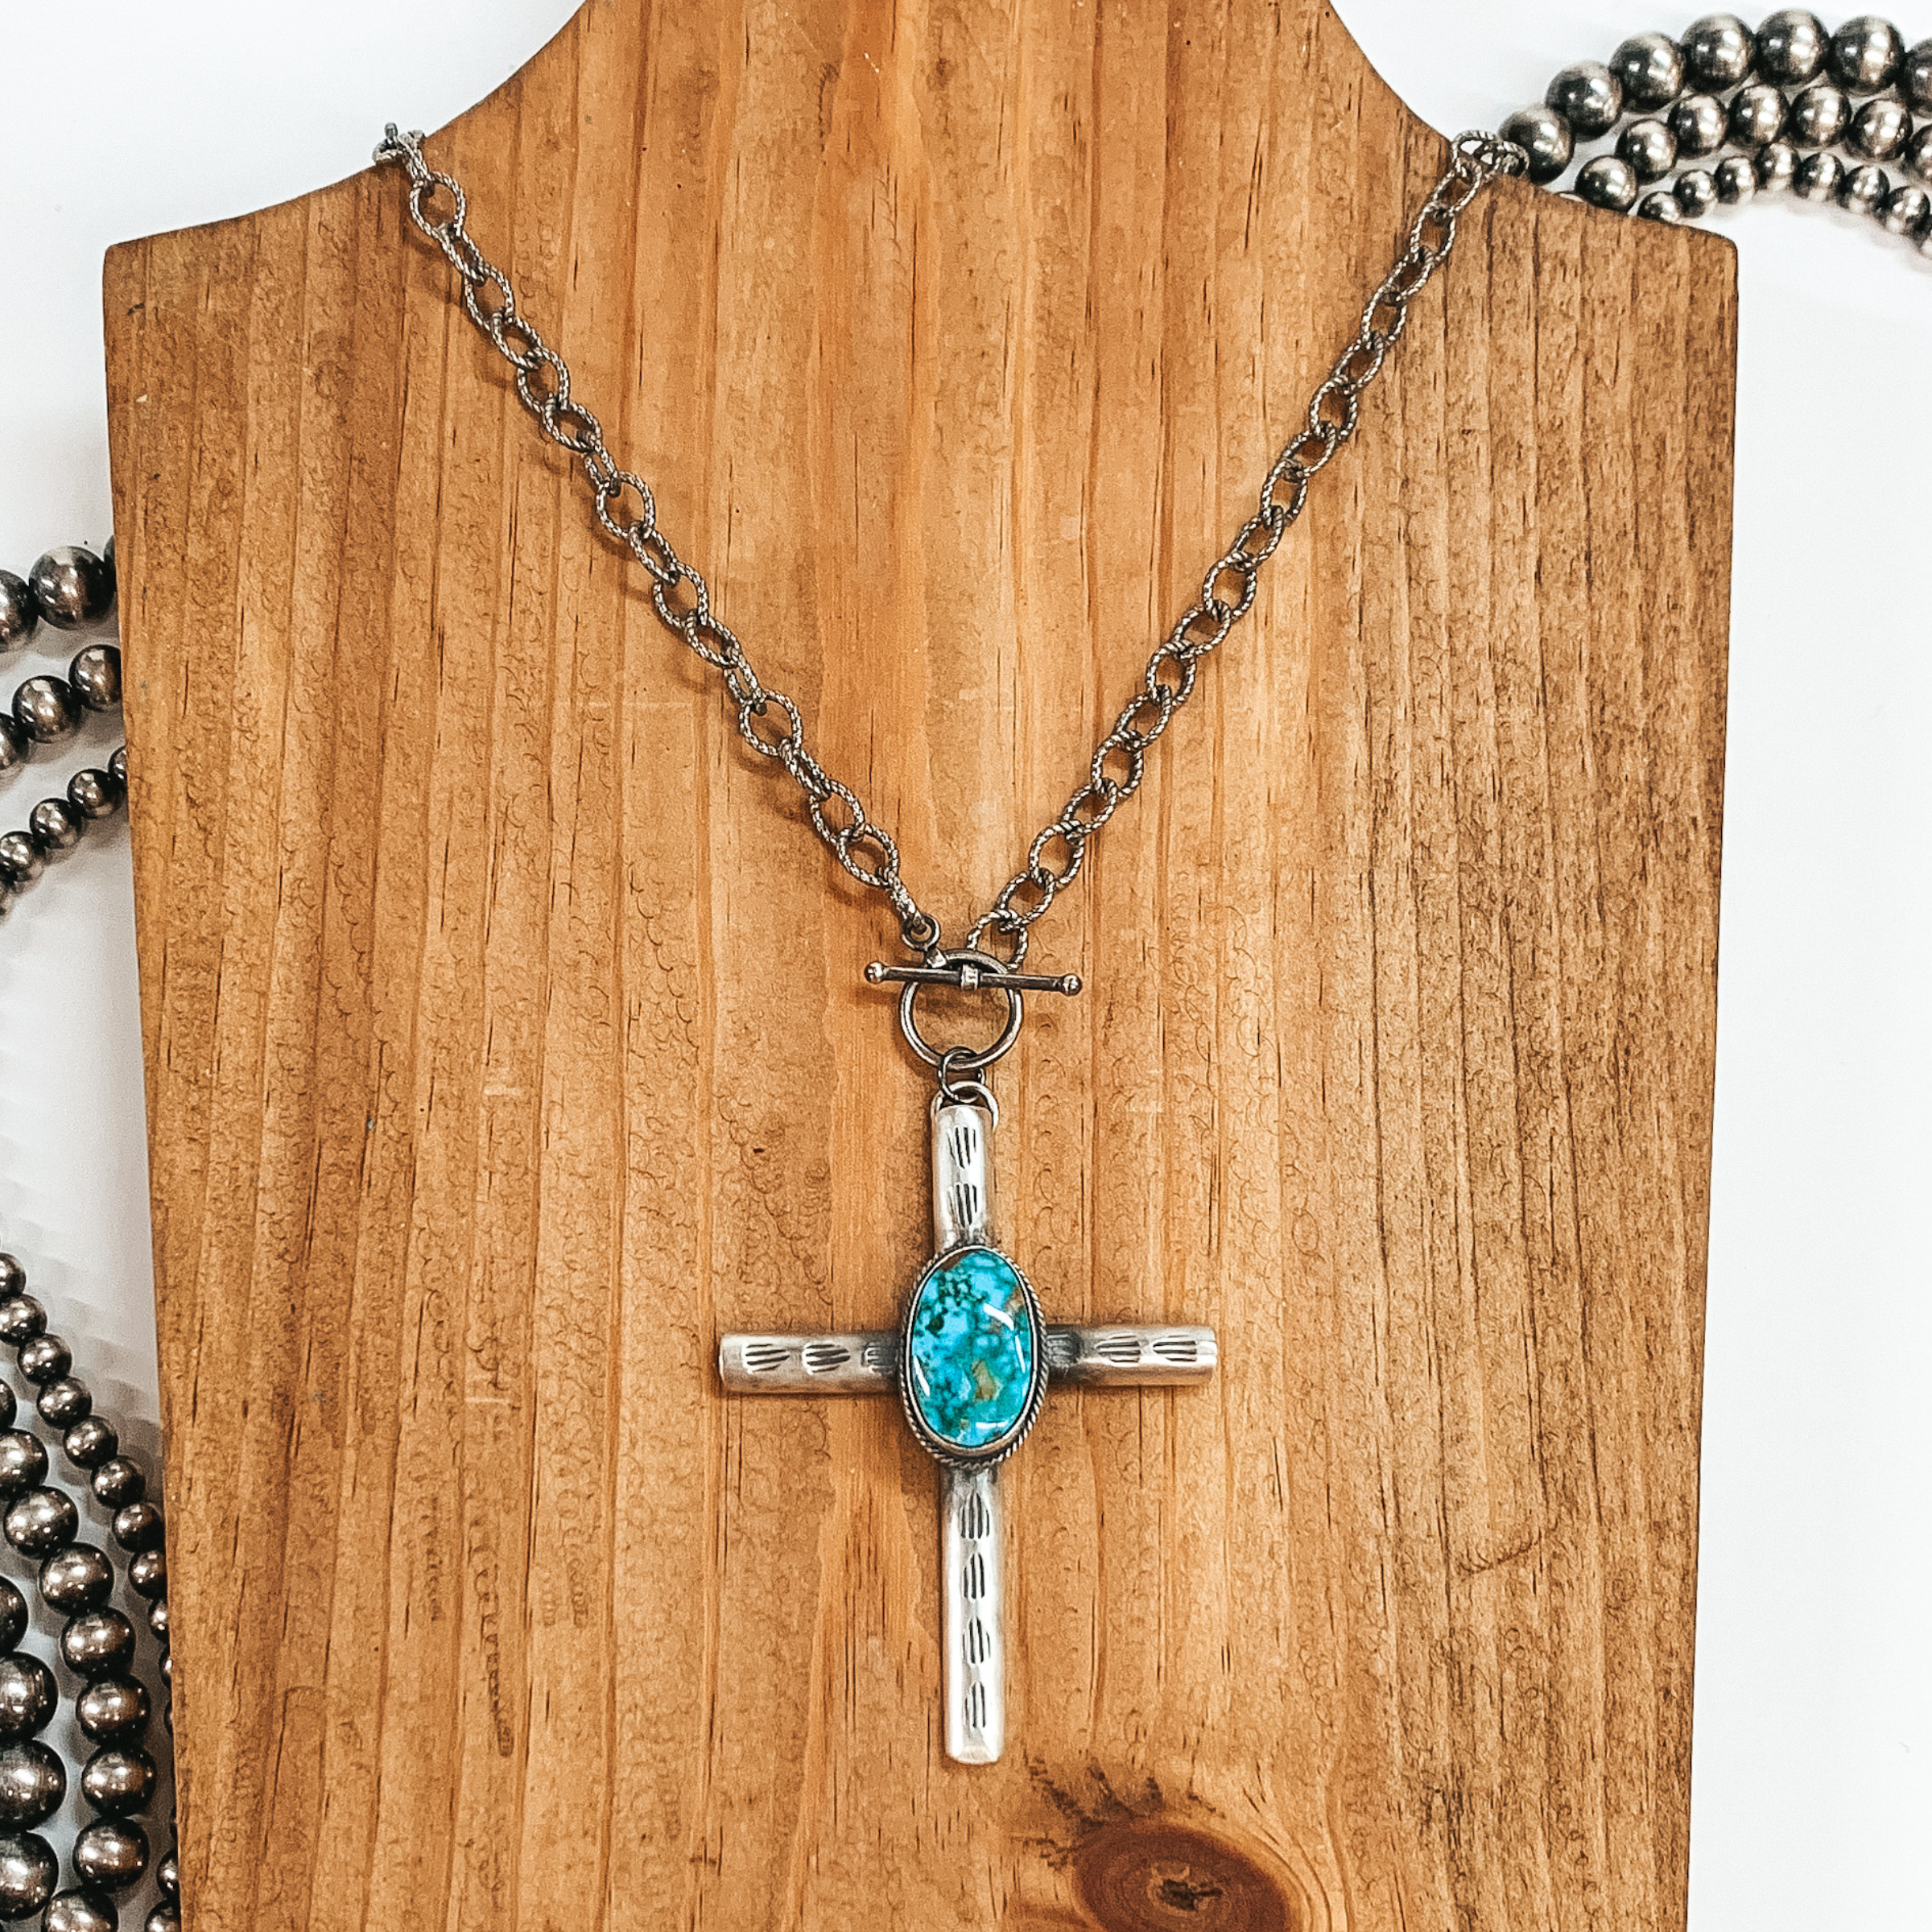 BS | Navajo Handmade Sterling Silver Chain Necklace and Cross Pendant with Turquoise Stone and Toggle Clasp - Giddy Up Glamour Boutique